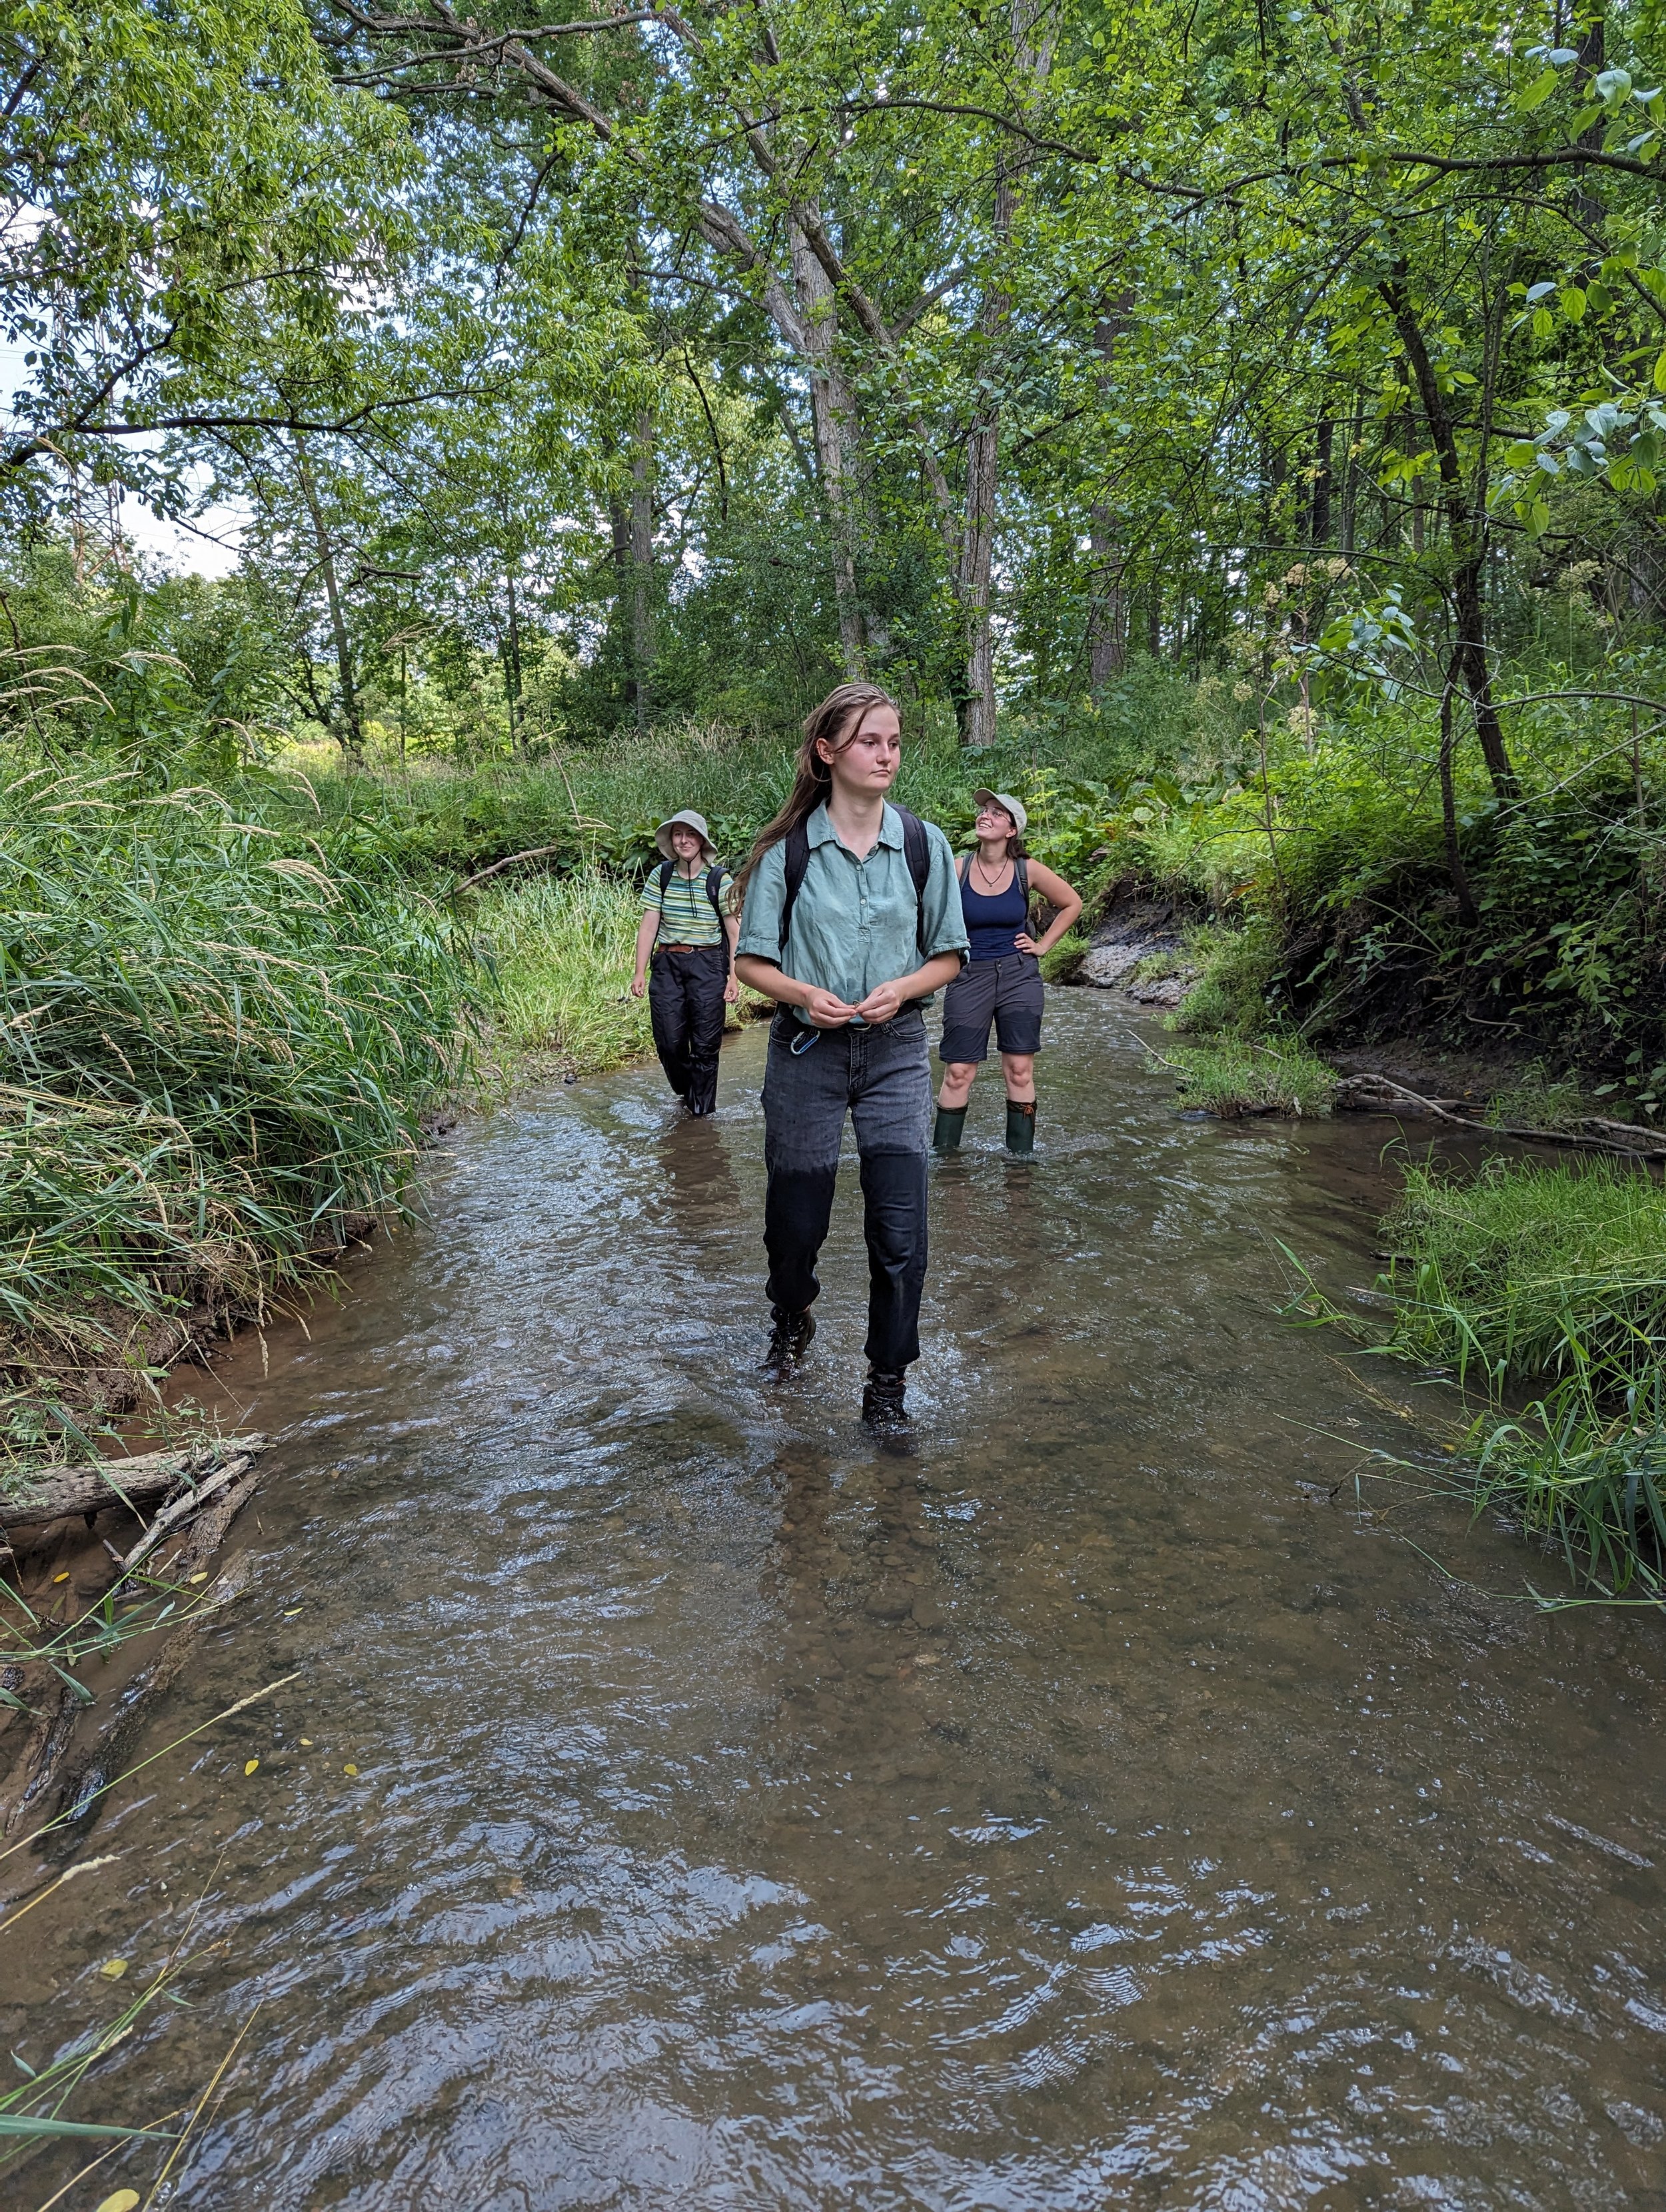  Botany Intern, Megan Roulston and Botany Students, Summer Thomas and Trinity Synard, on their way out of a field site in the middle of summer (Photo by Nadia Cavallin).&nbsp;  &nbsp; 